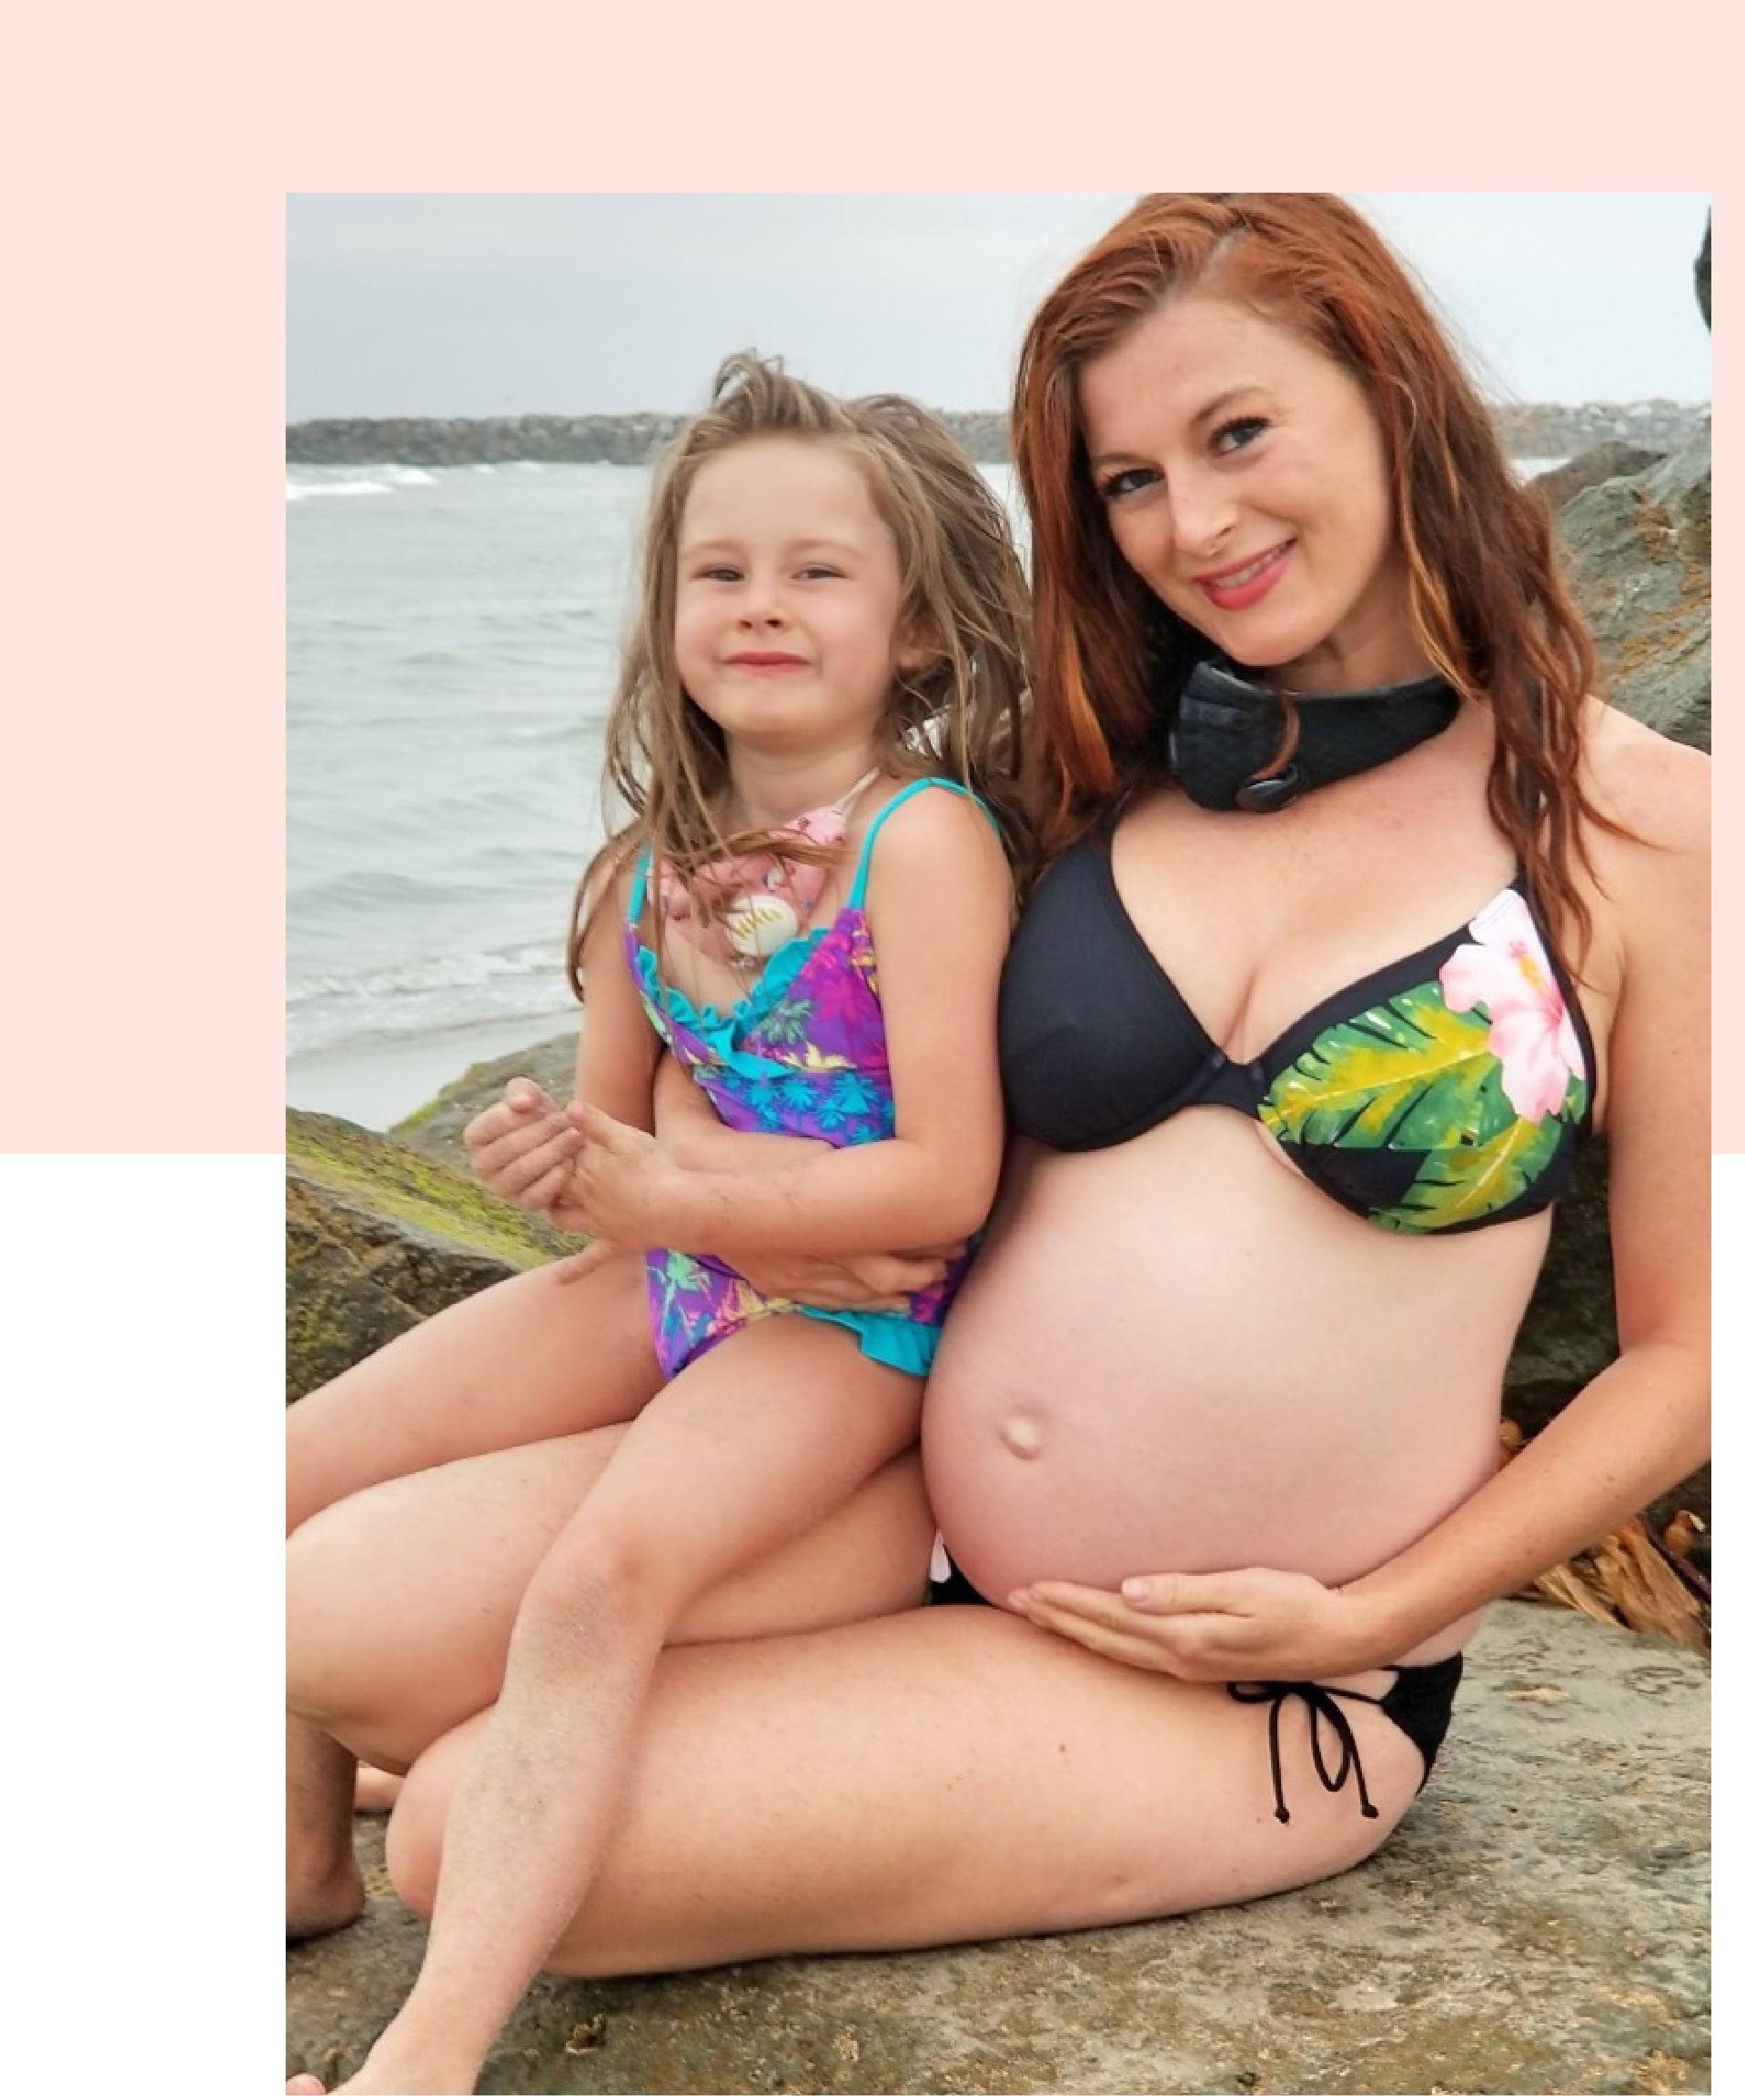 Rachel Reilly is wearing SKYE's Hilary D top and Juliana bottom from the Bora Bora collection.